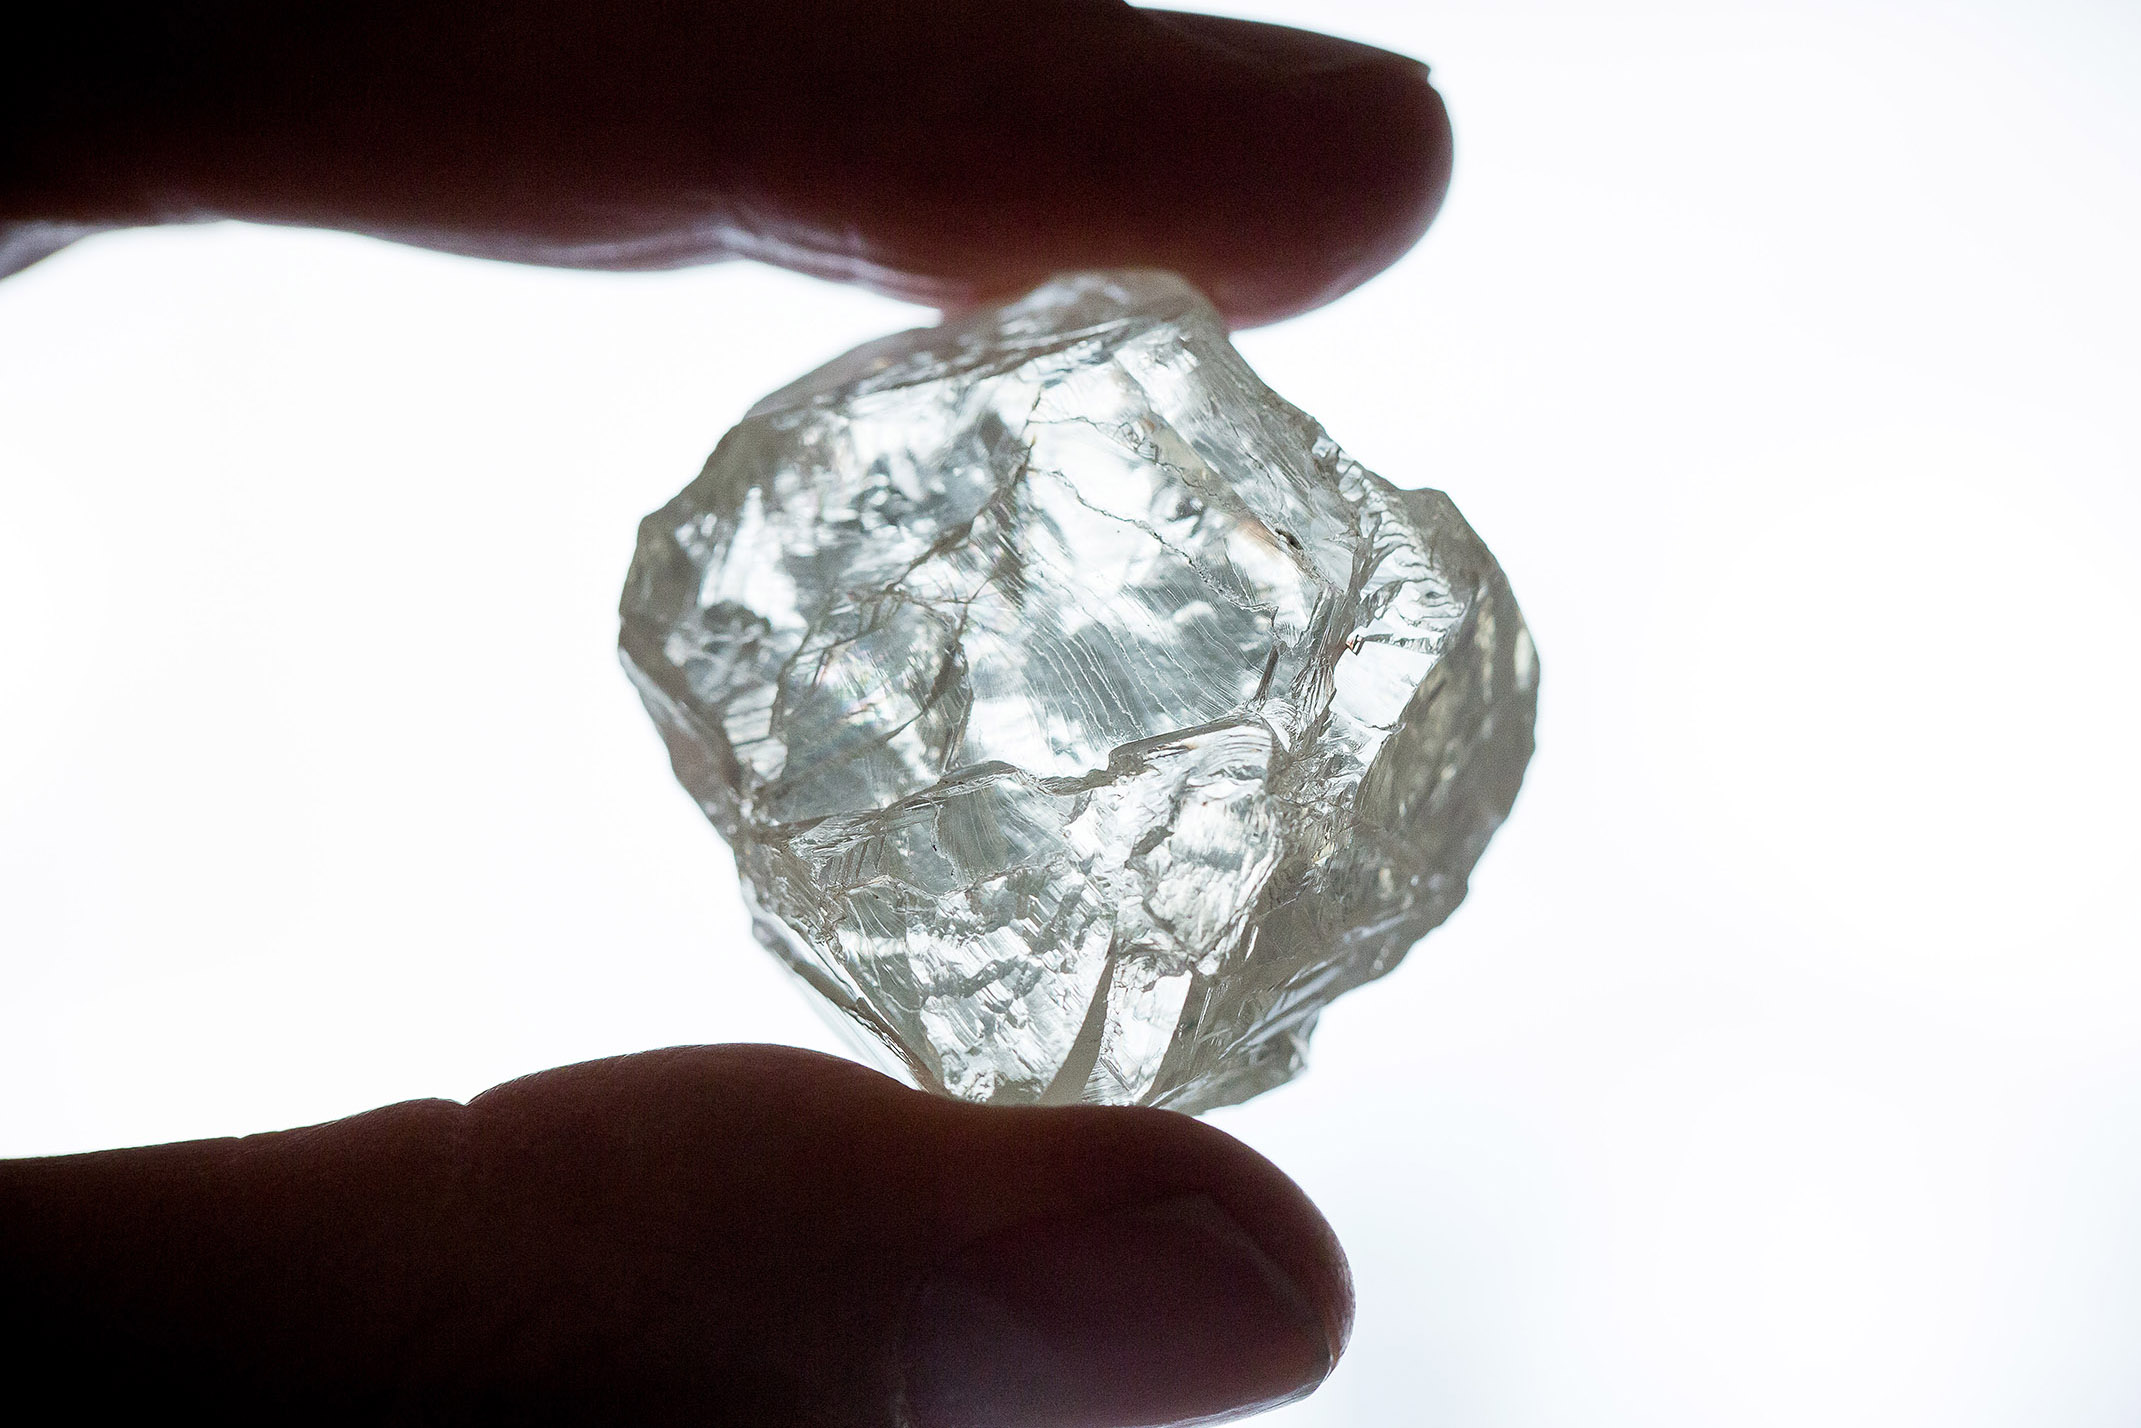 Cullinan diamond: 500-carat stone - one of the 20 largest ever